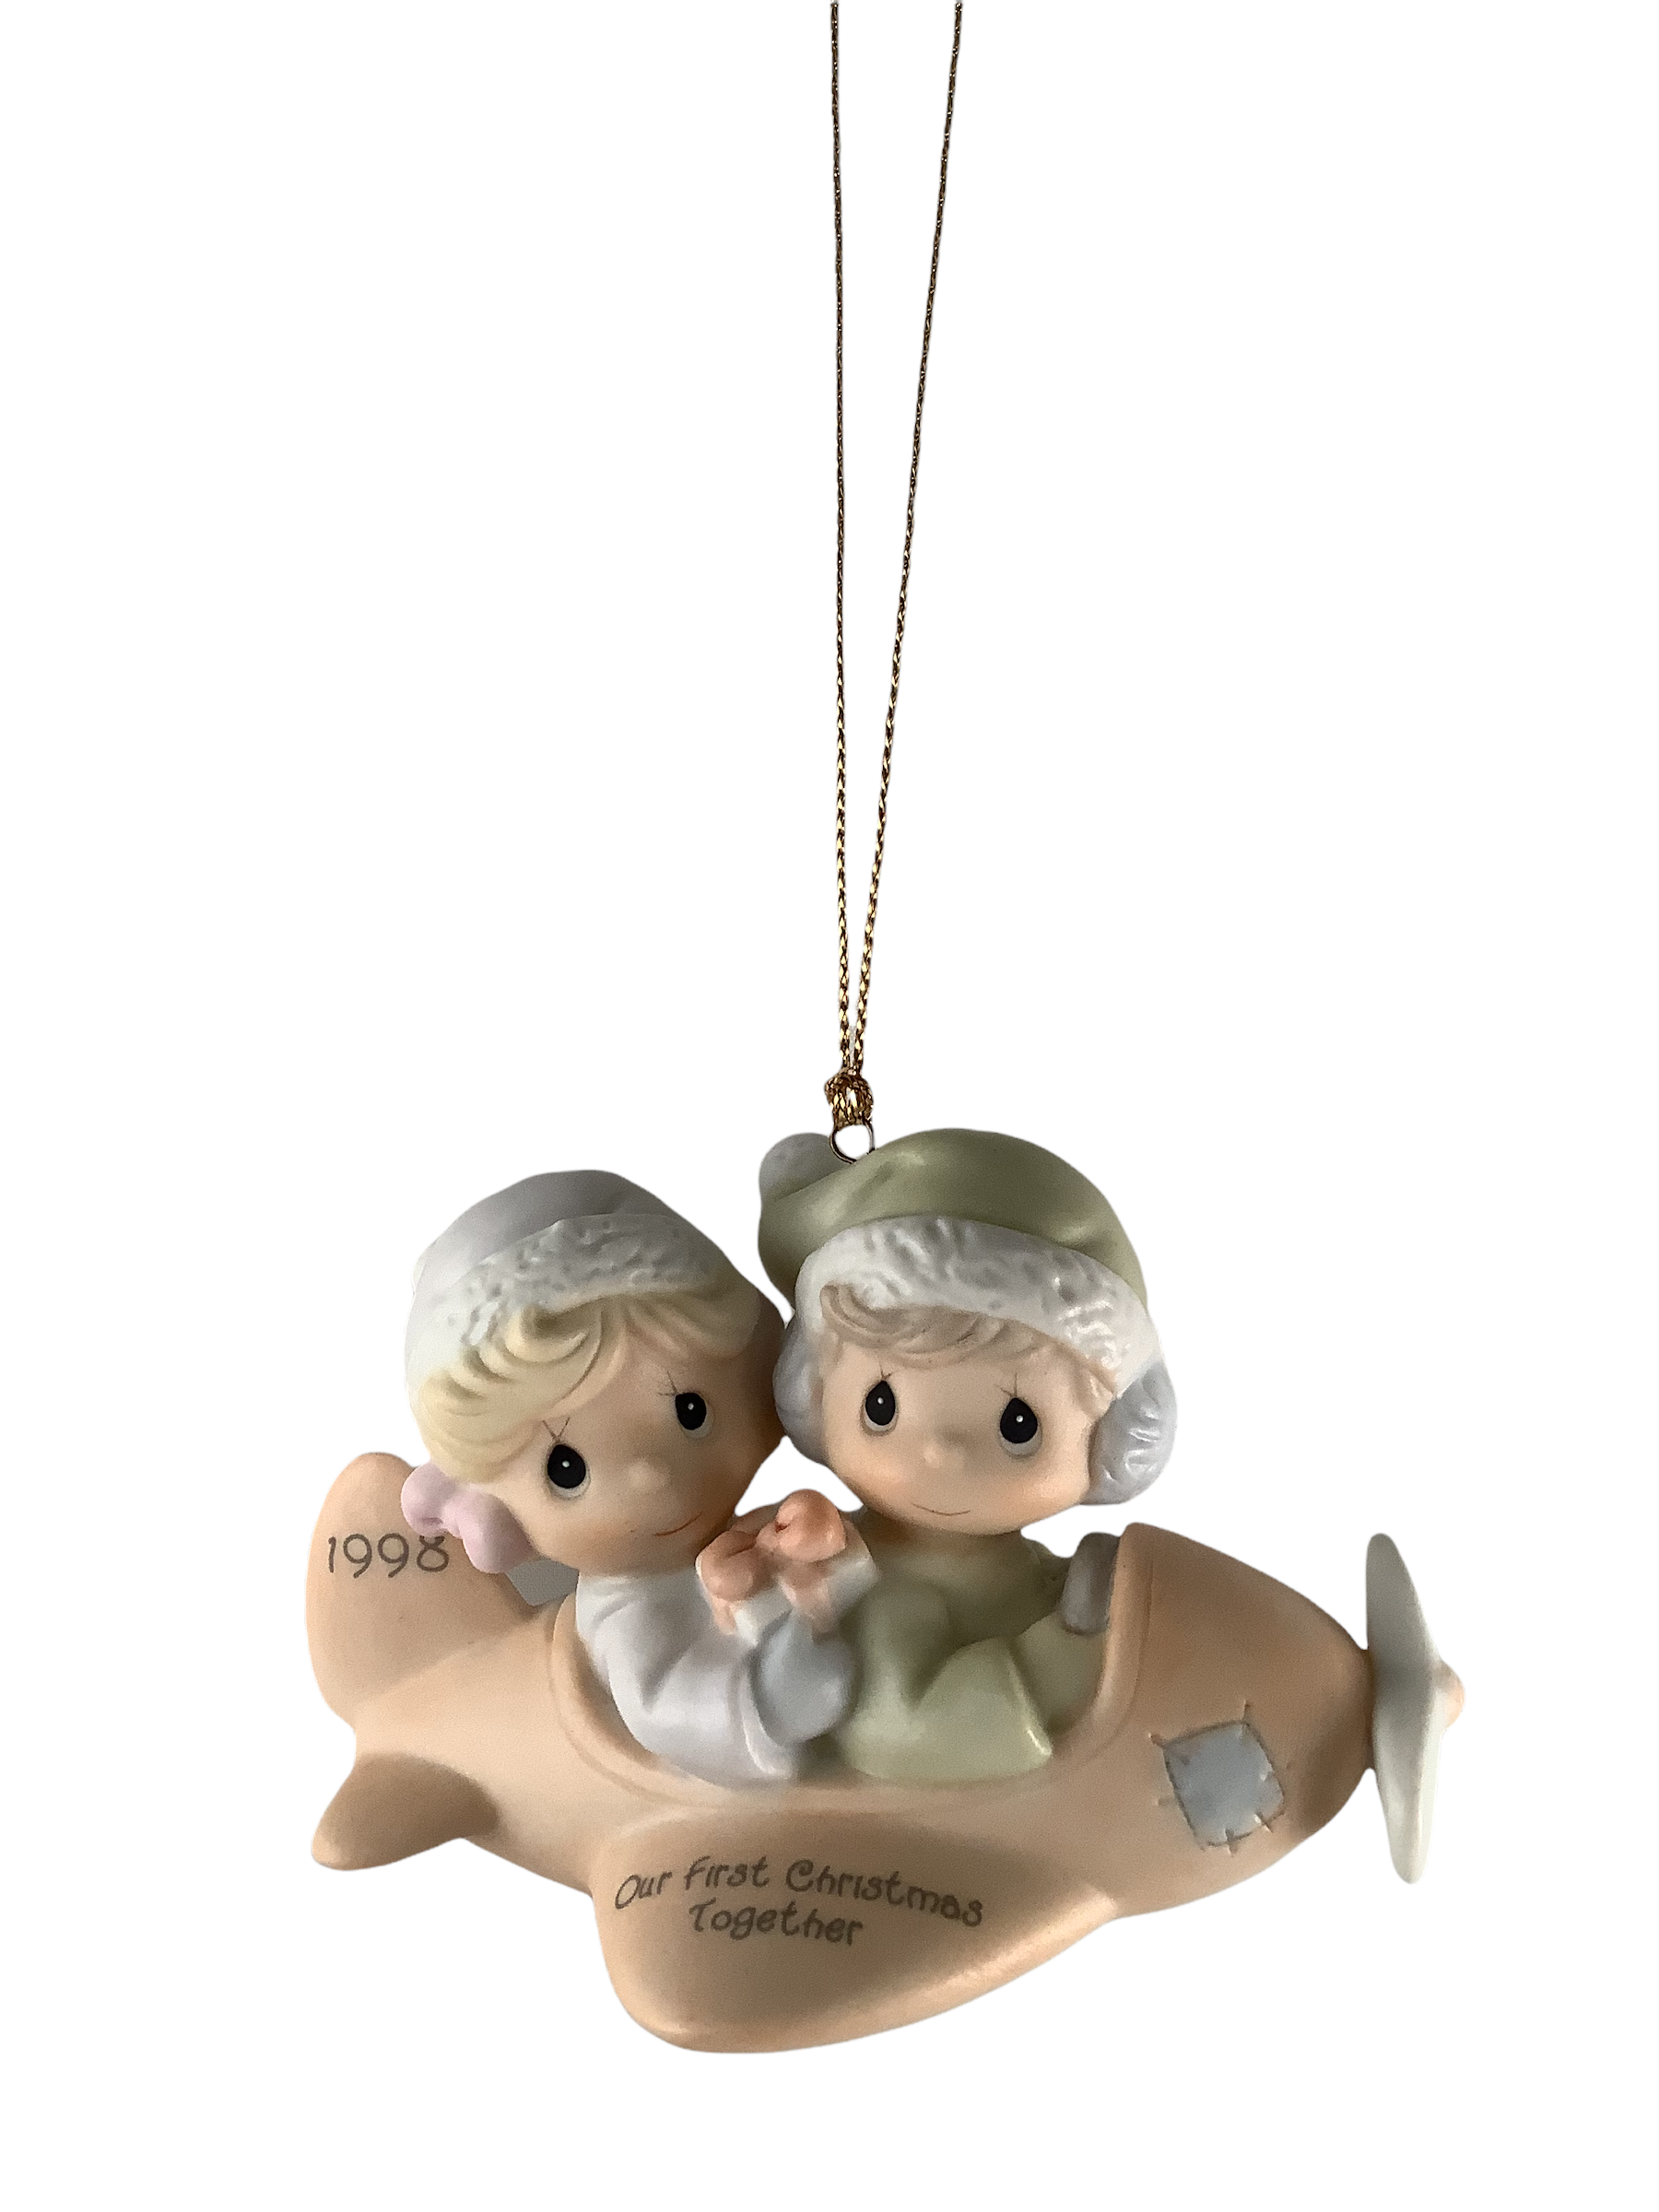 Our First Christmas Together 1998 - Precious Moment Ornament